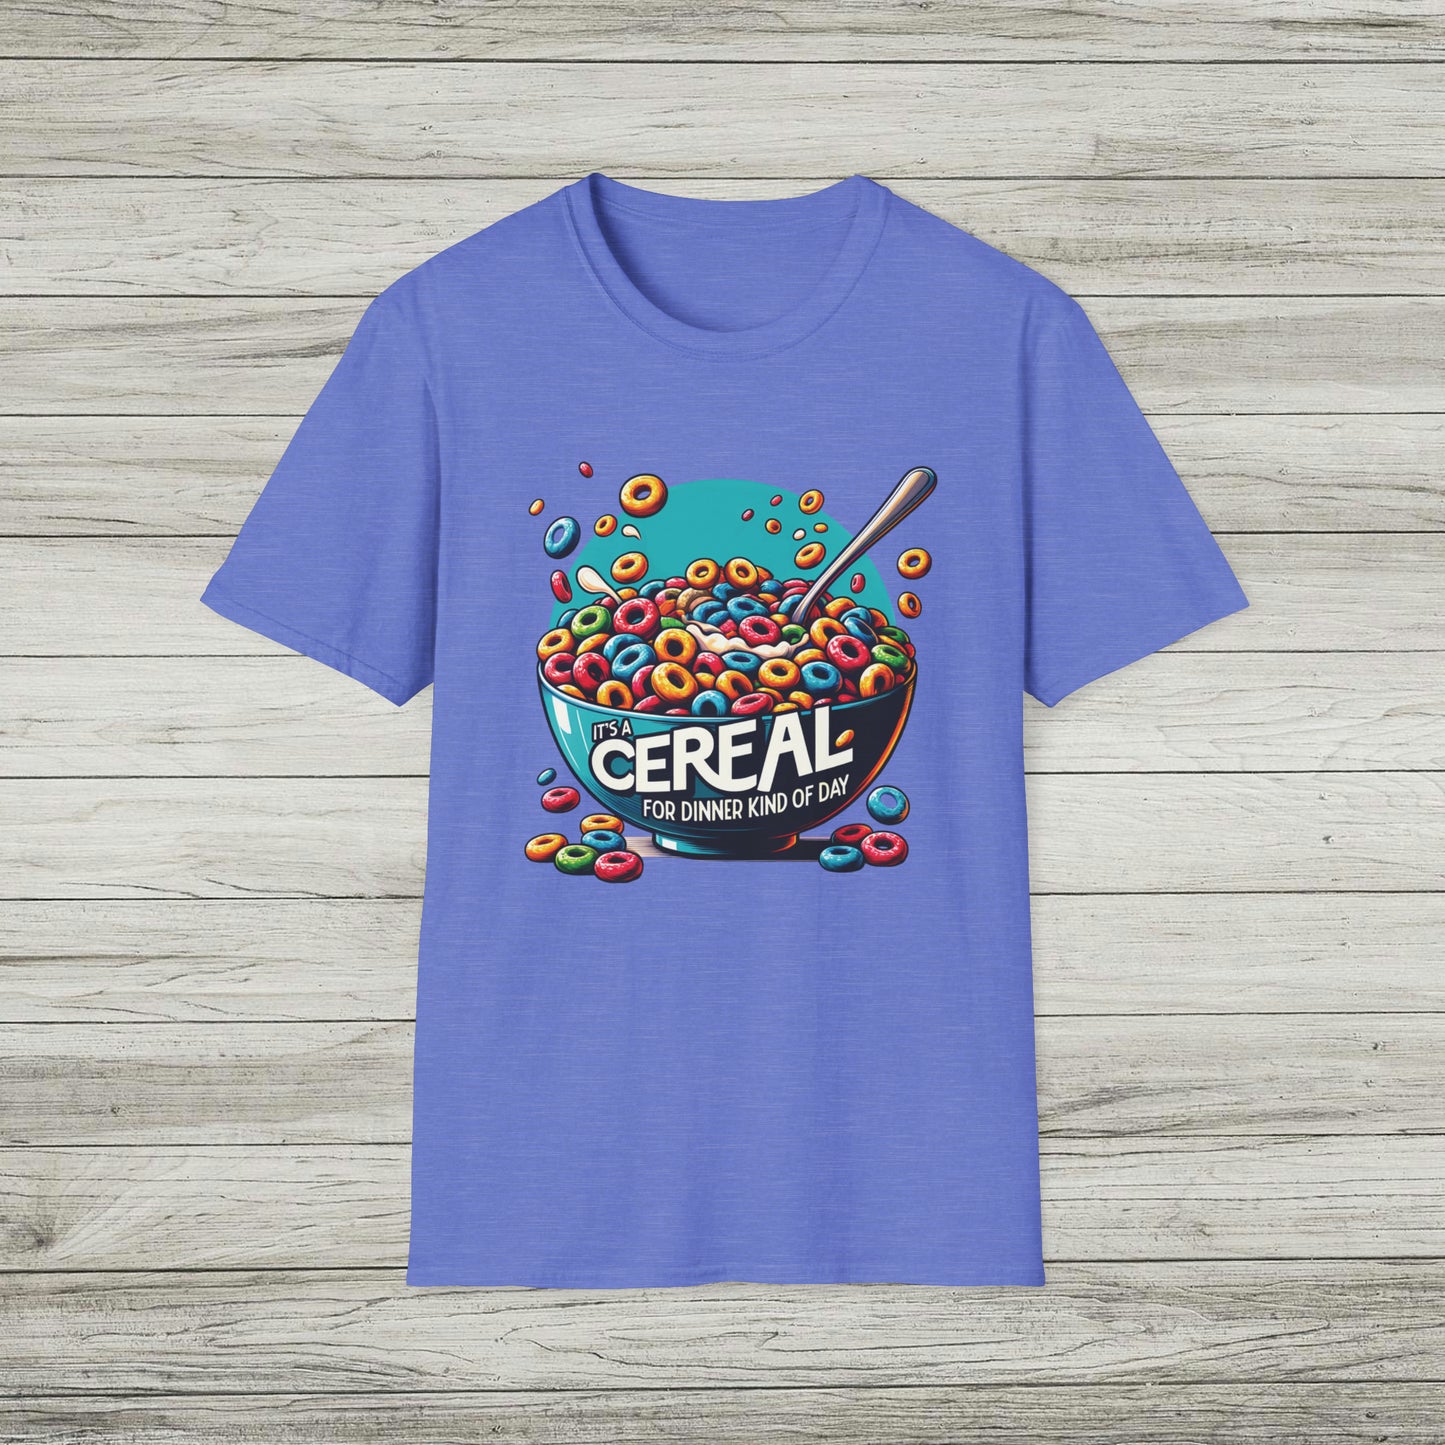 Cereal for Dinner Softstyle T-Shirt, Girl Dinner TShirt, Funny Bad Day Tee